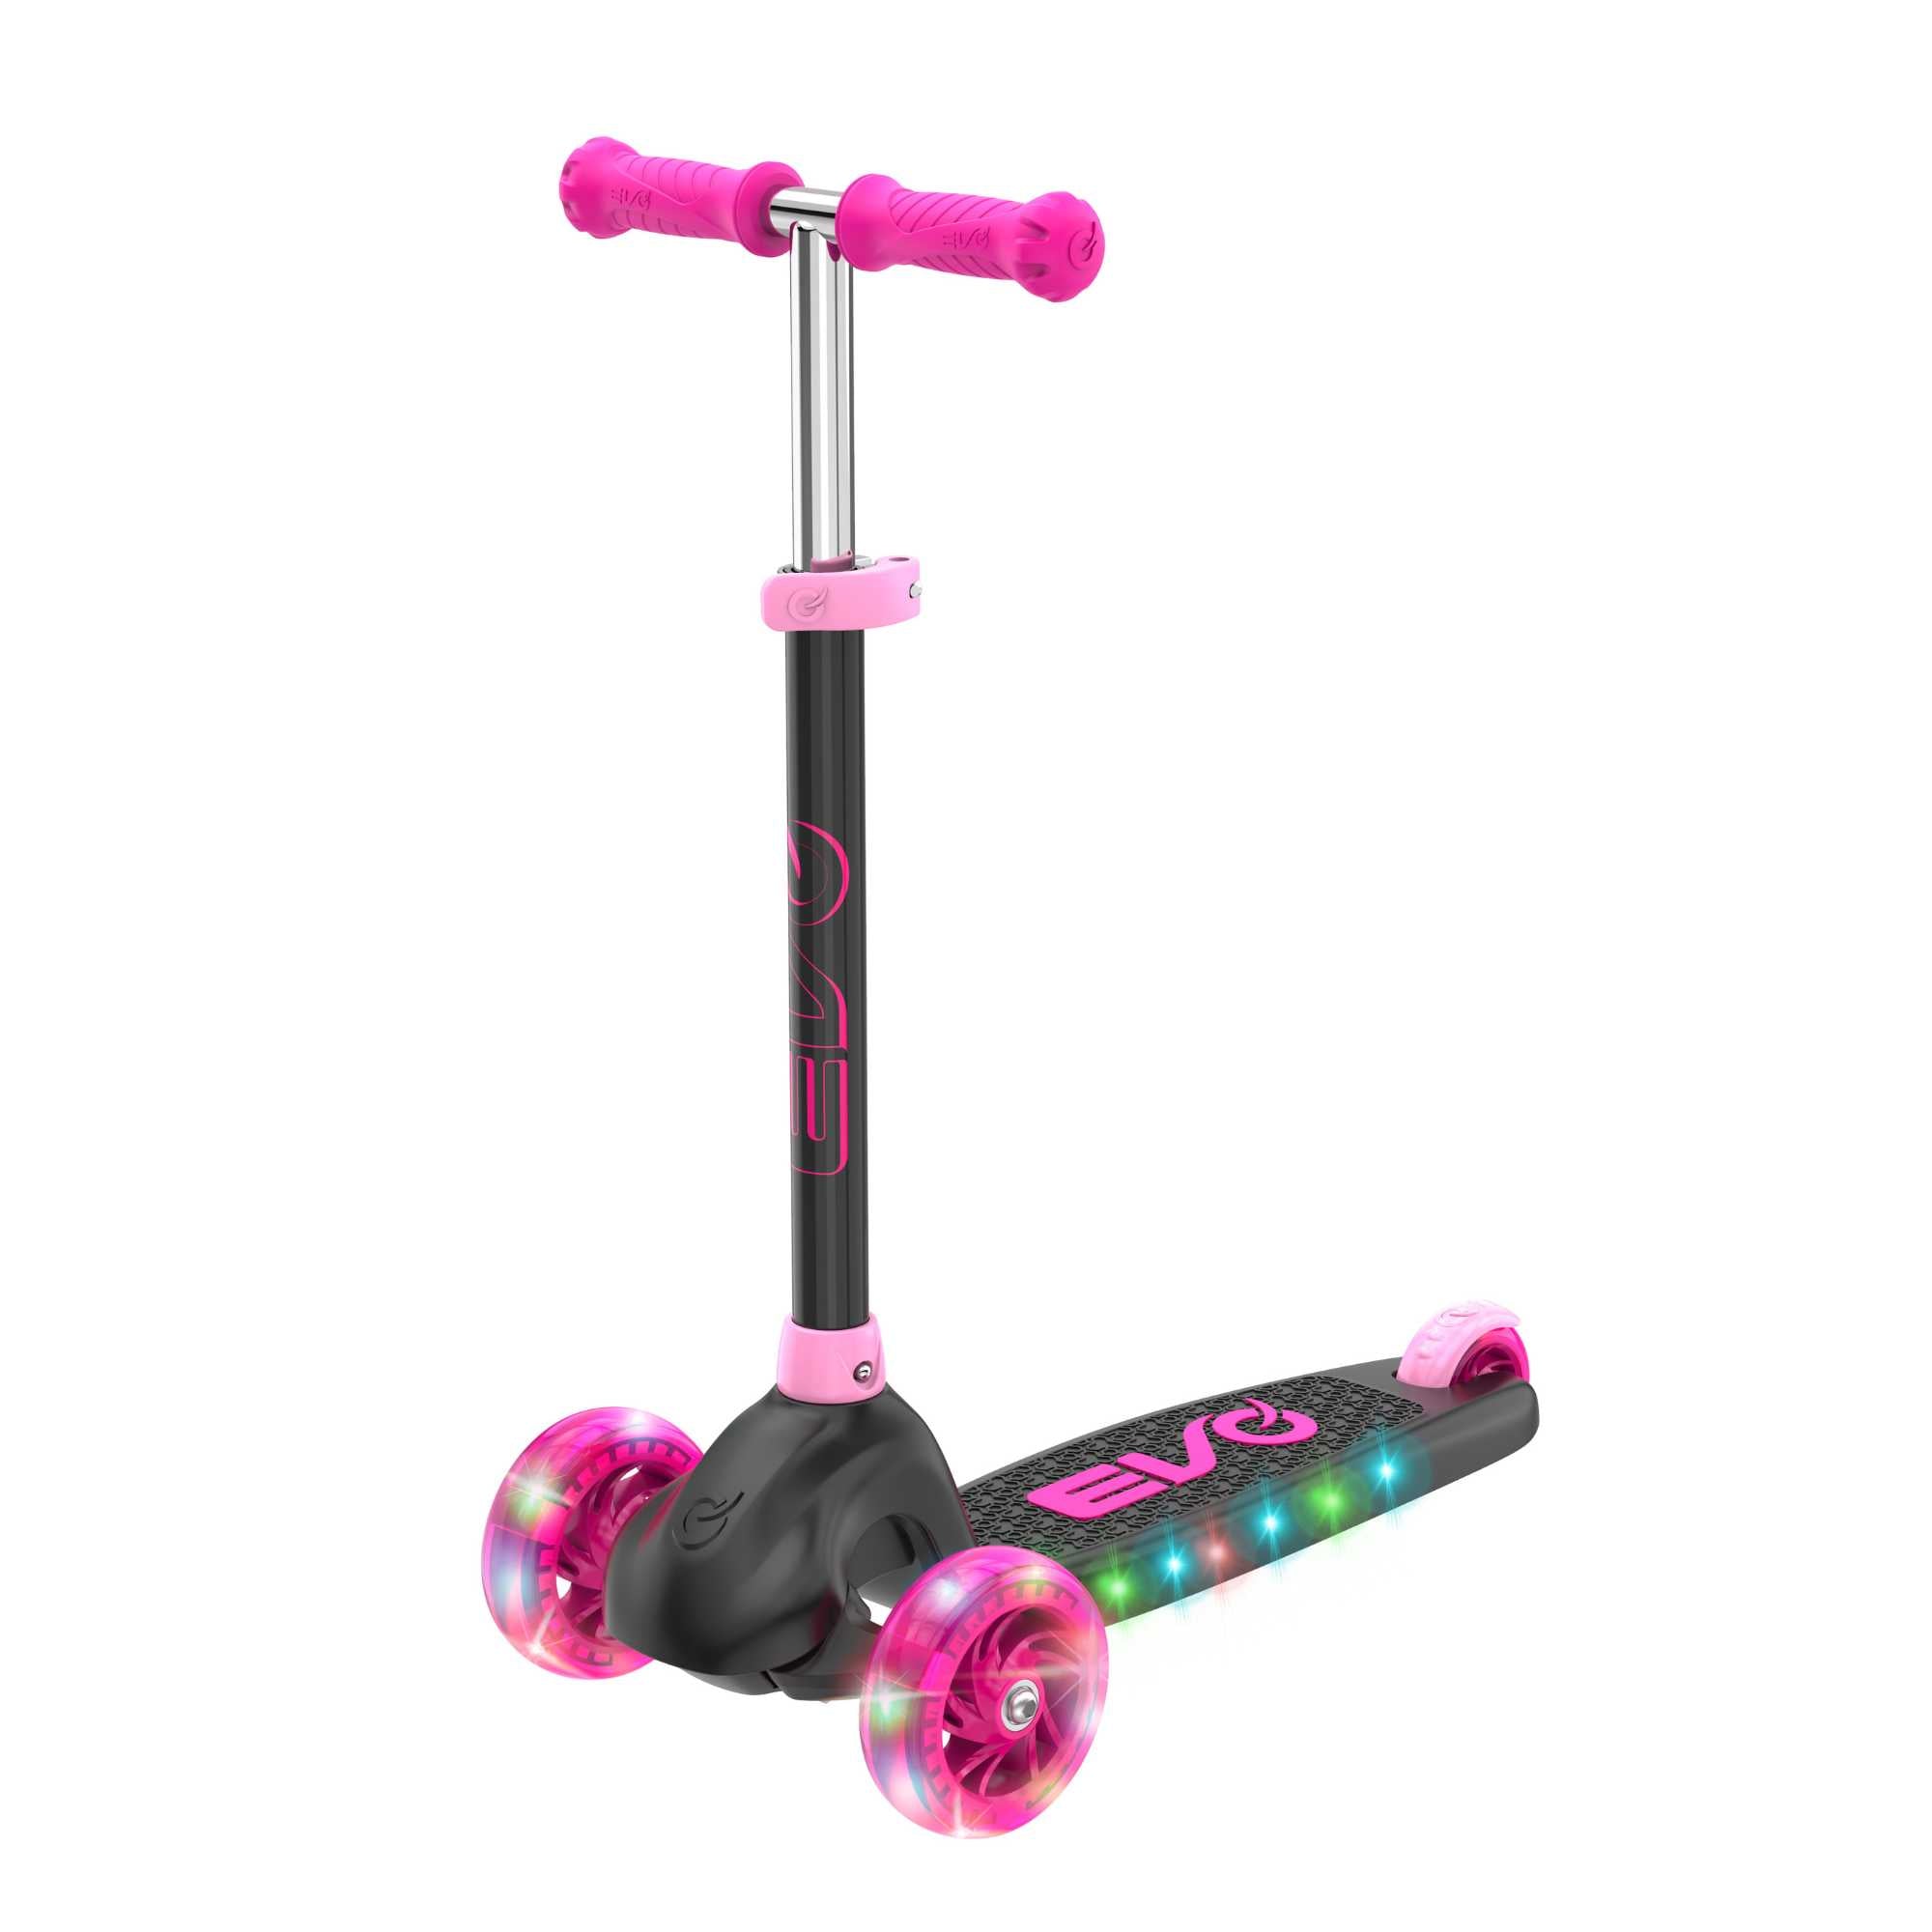 EVO Eclipse Light Up Scooter - Pink from Wowow Toys